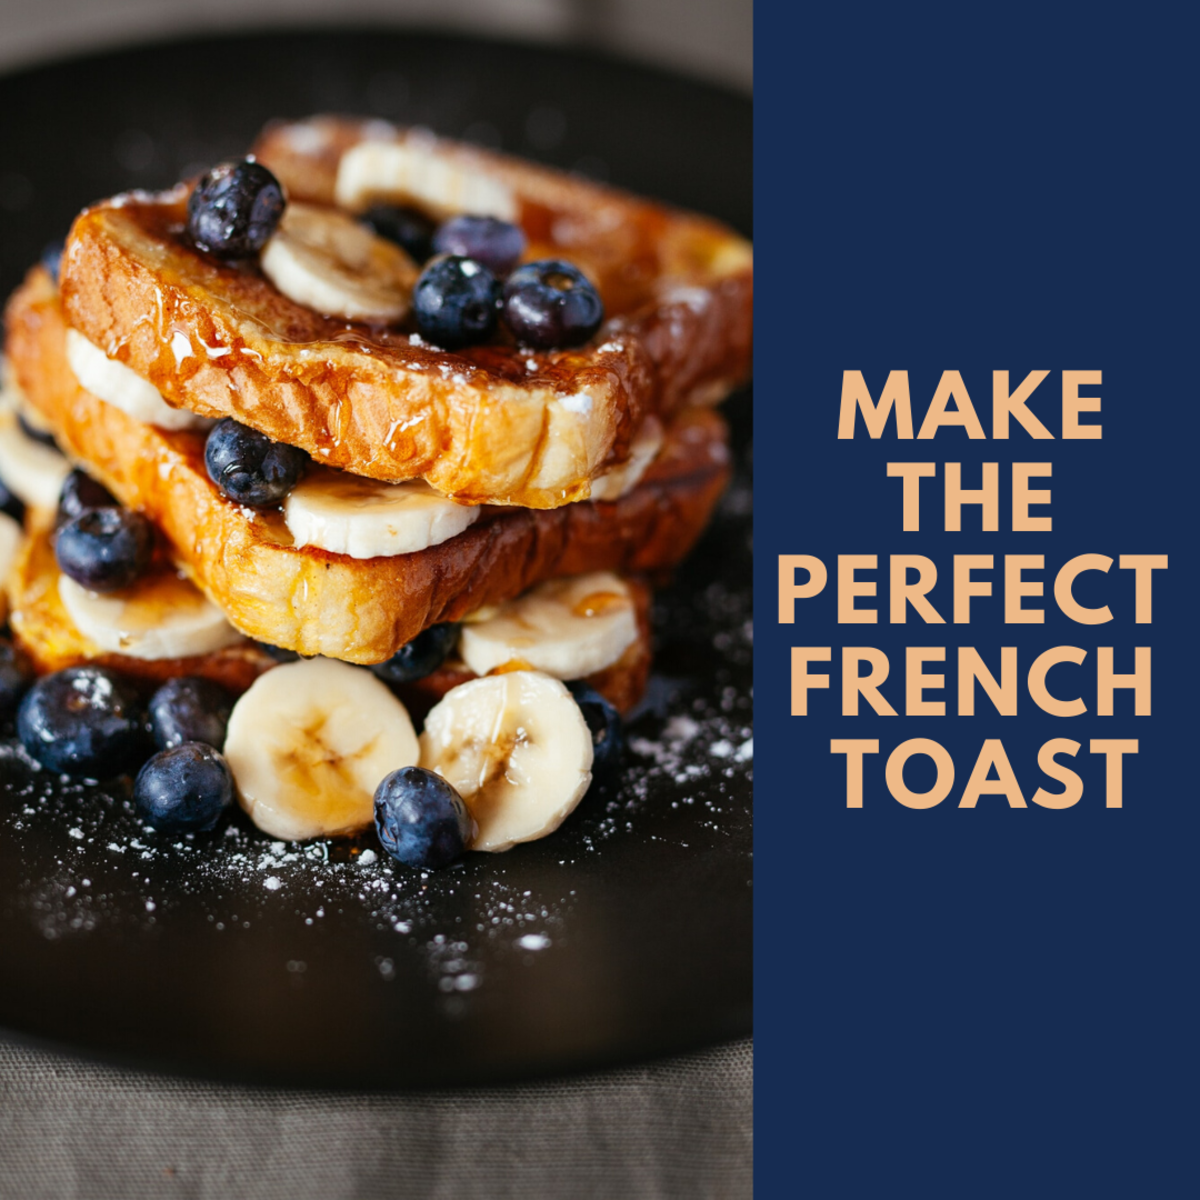 This perfect French toast is great for the whole family.